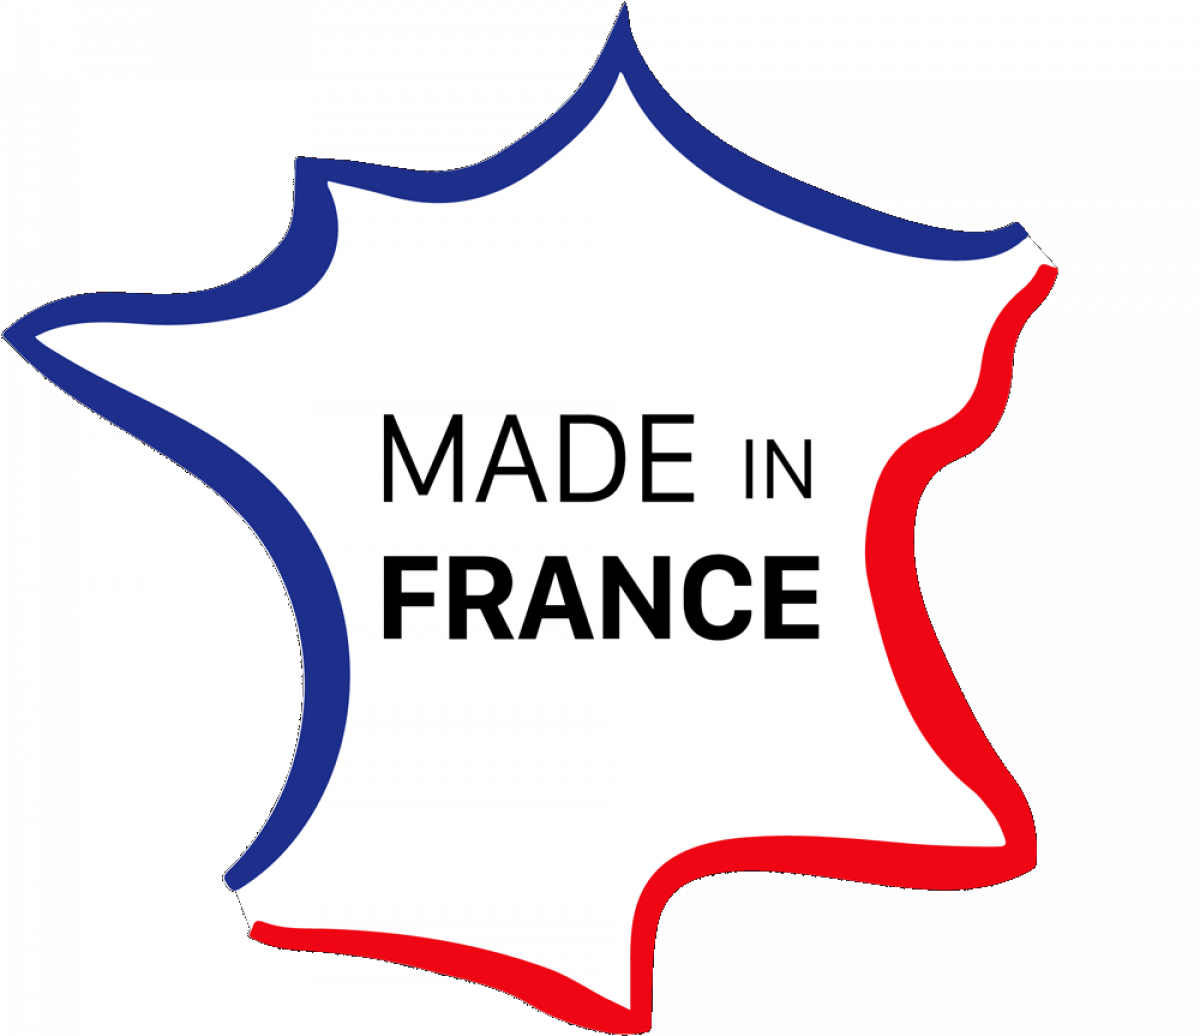 Label Made in France